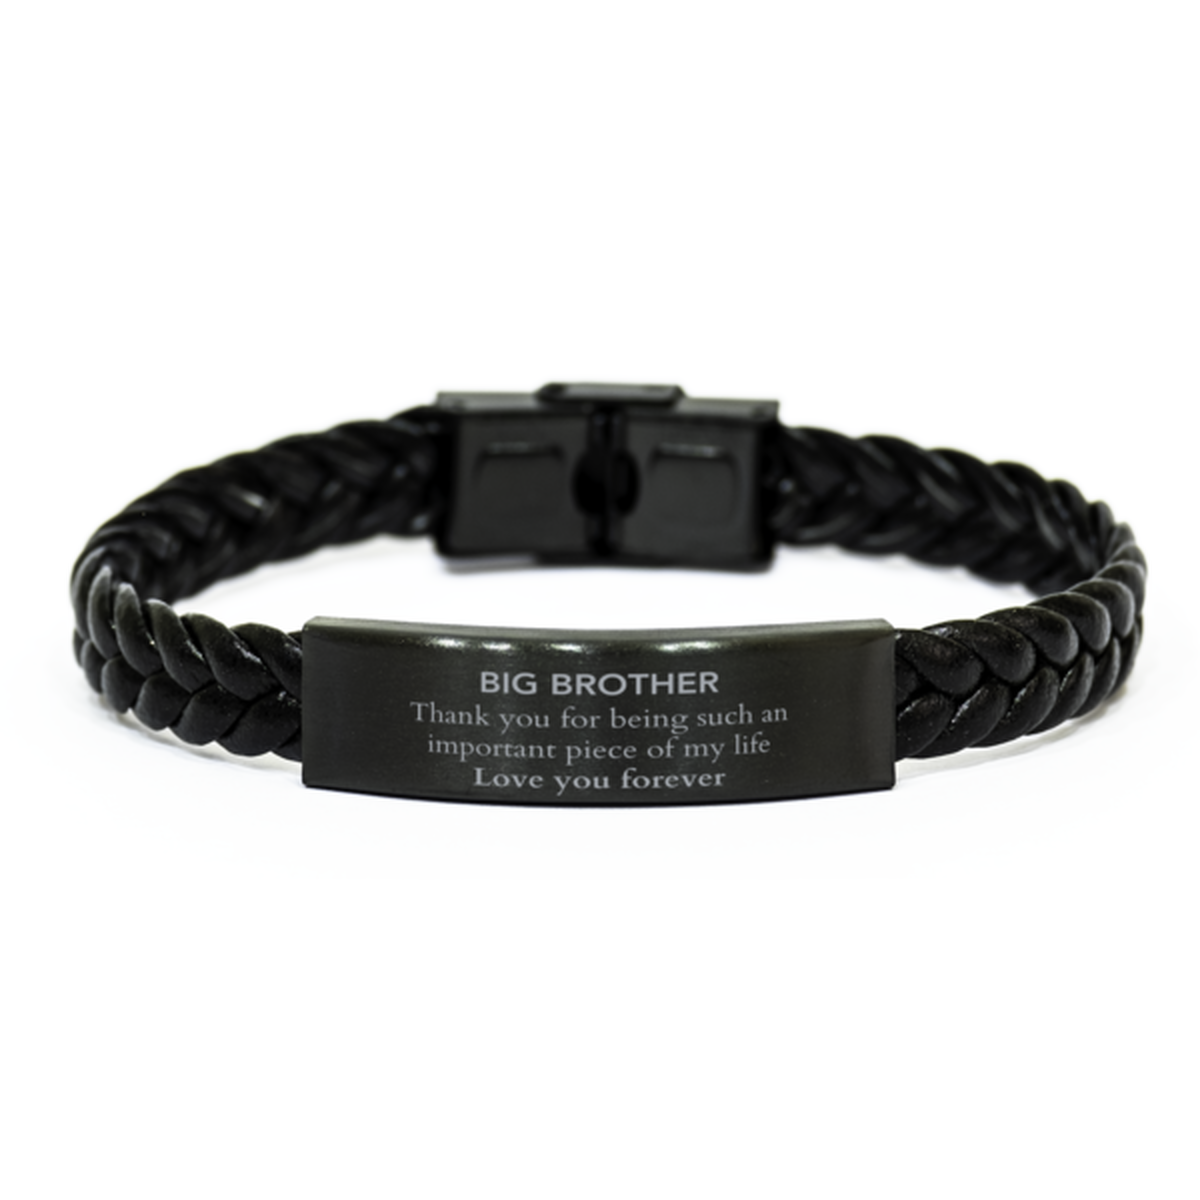 Appropriate Big Brother Braided Leather Bracelet Epic Birthday Gifts for Big Brother Thank you for being such an important piece of my life Big Brother Christmas Mothers Fathers Day